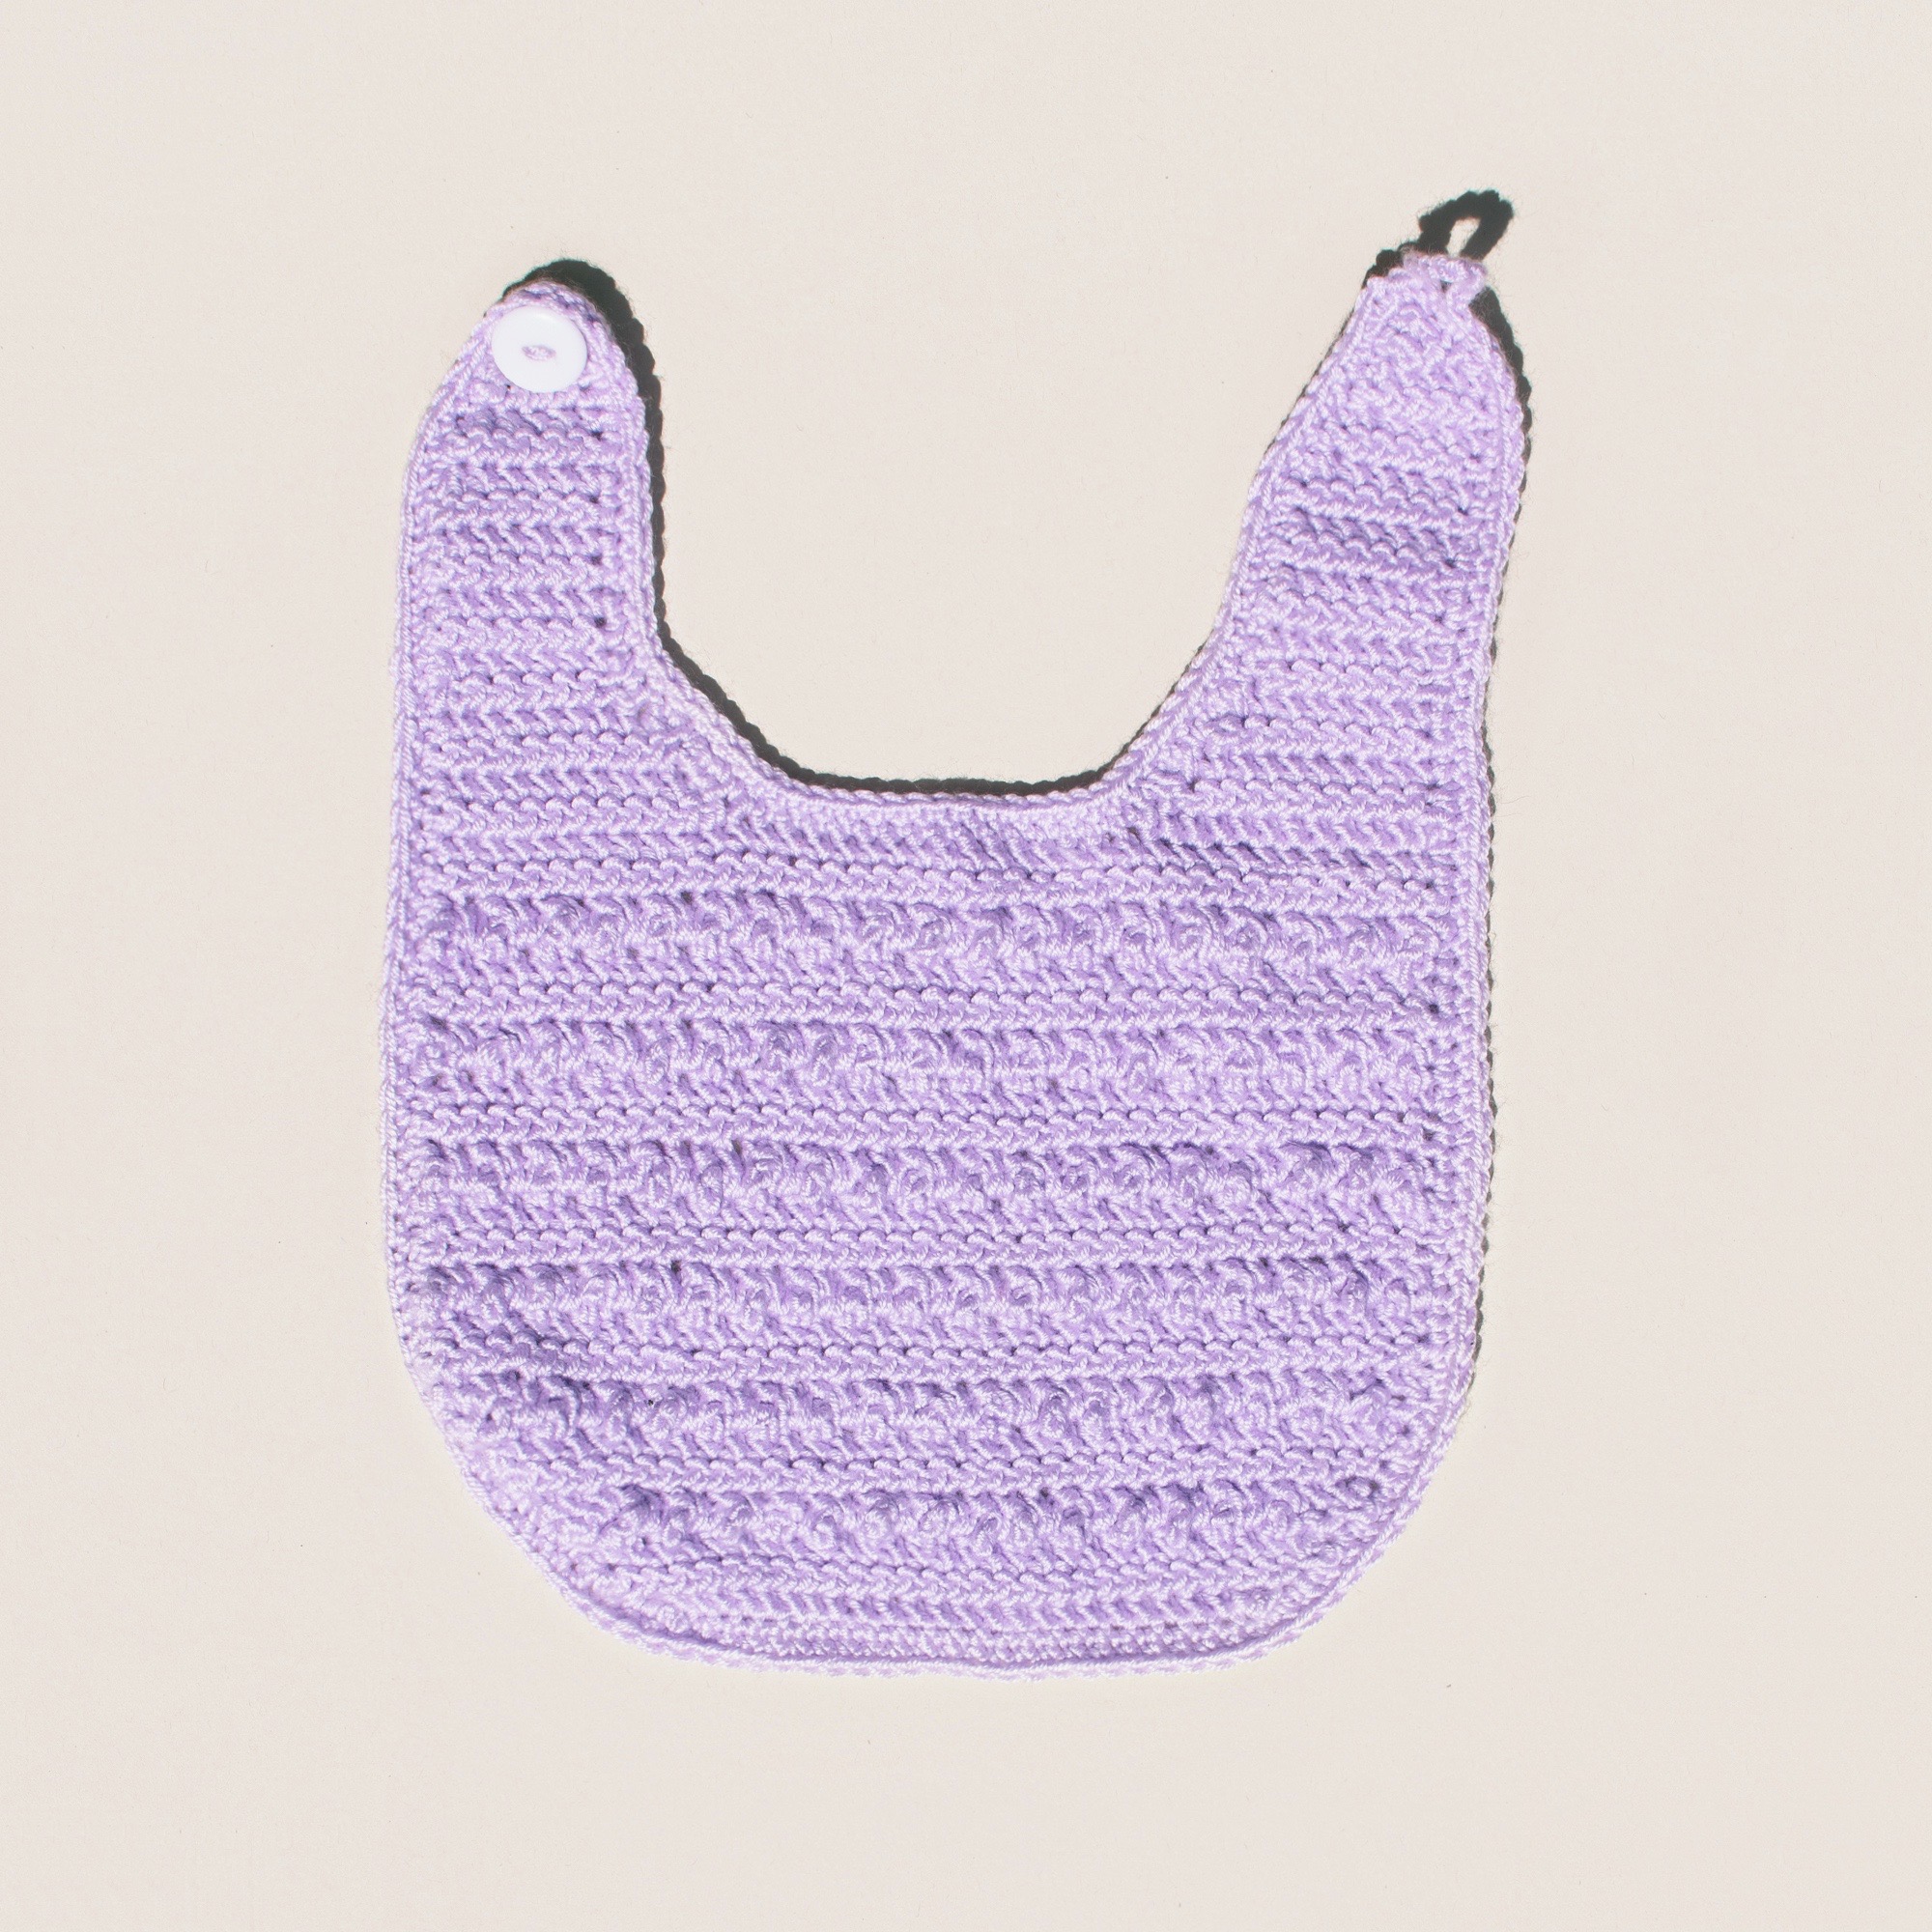 This baby bib pattern also works up well in a solid colour